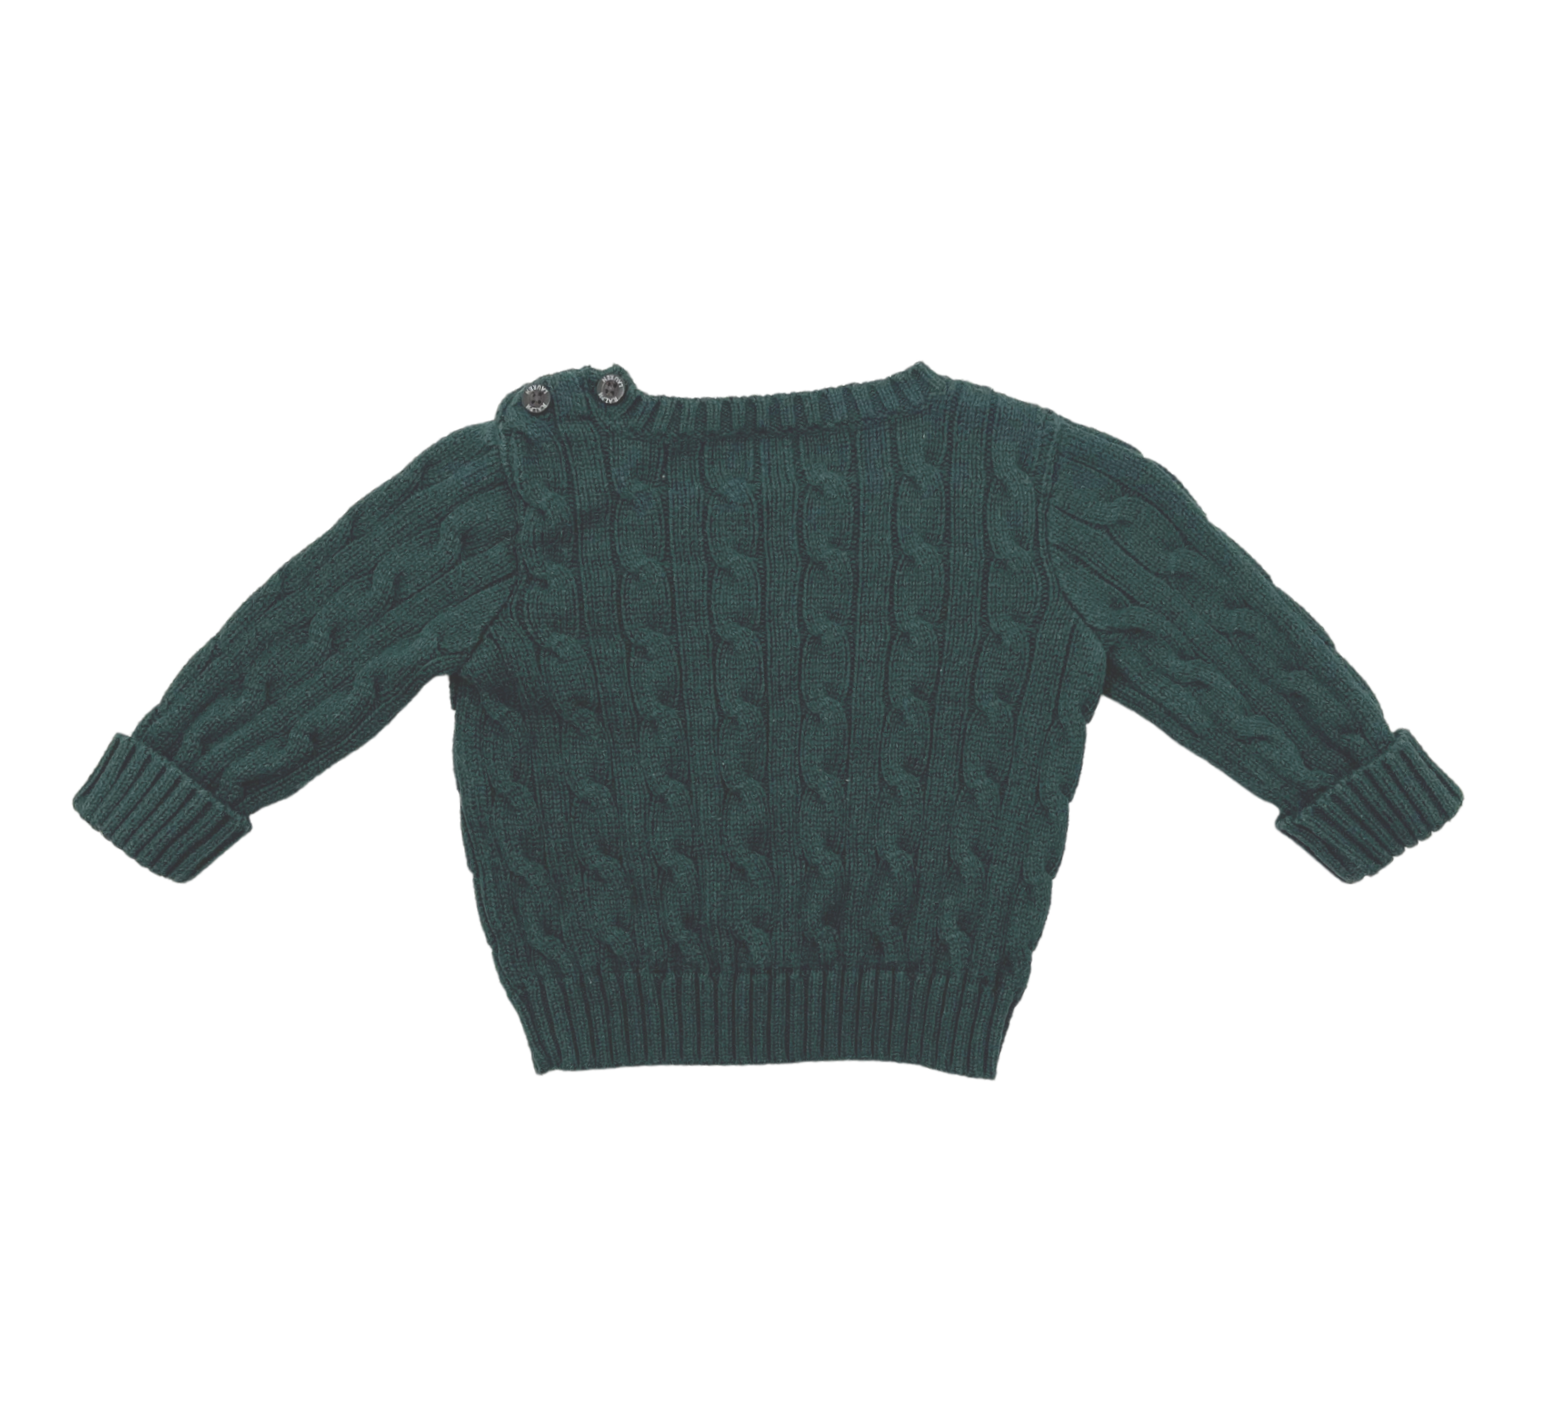 RALPH LAUREN - Cable knit sweater in green cotton - 6 months